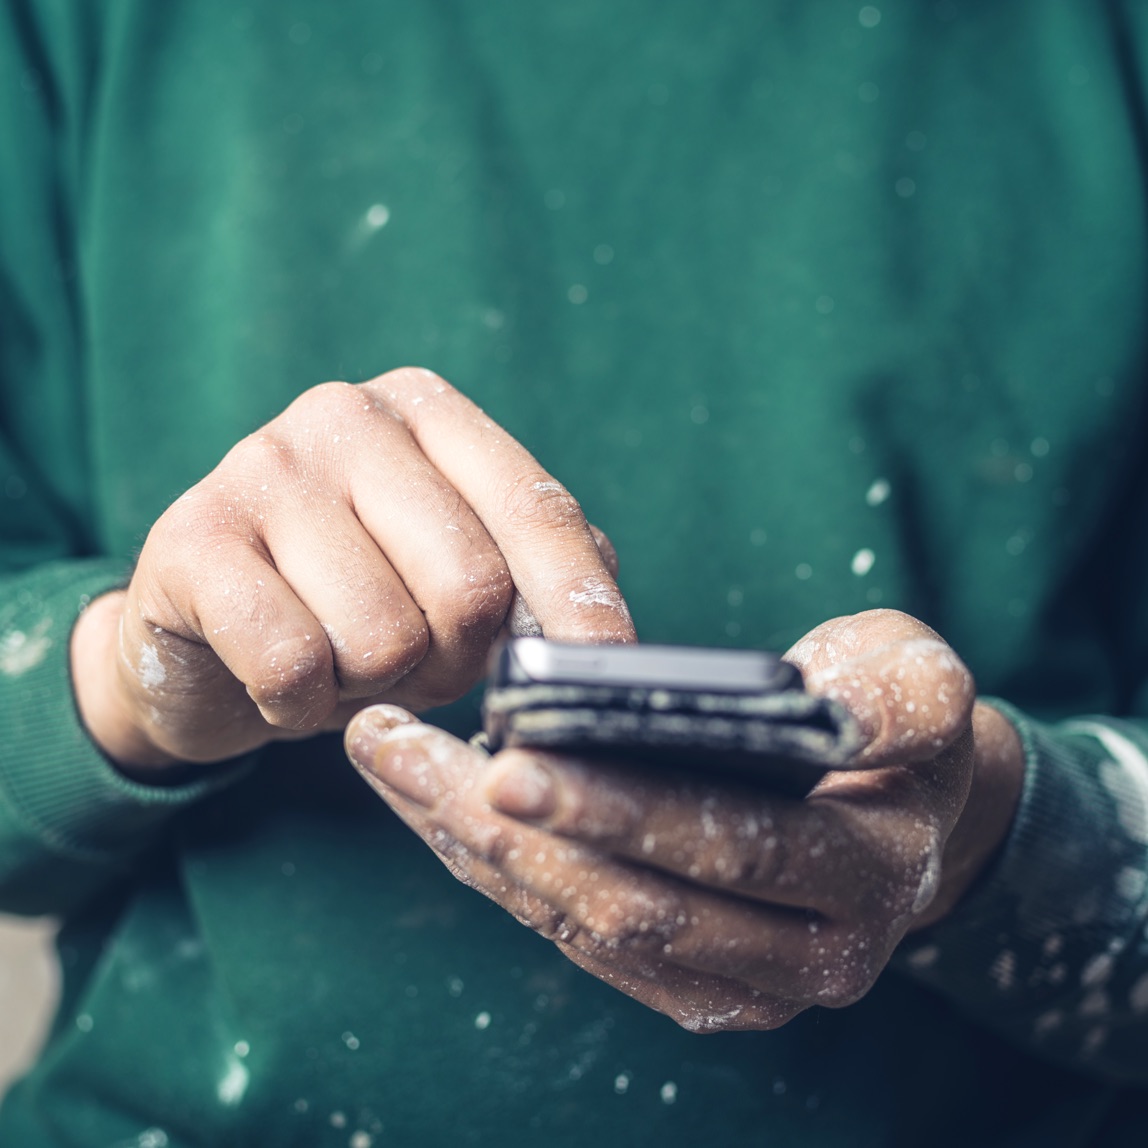 Image of hands covered in paint splatter using a smartphone to look something up